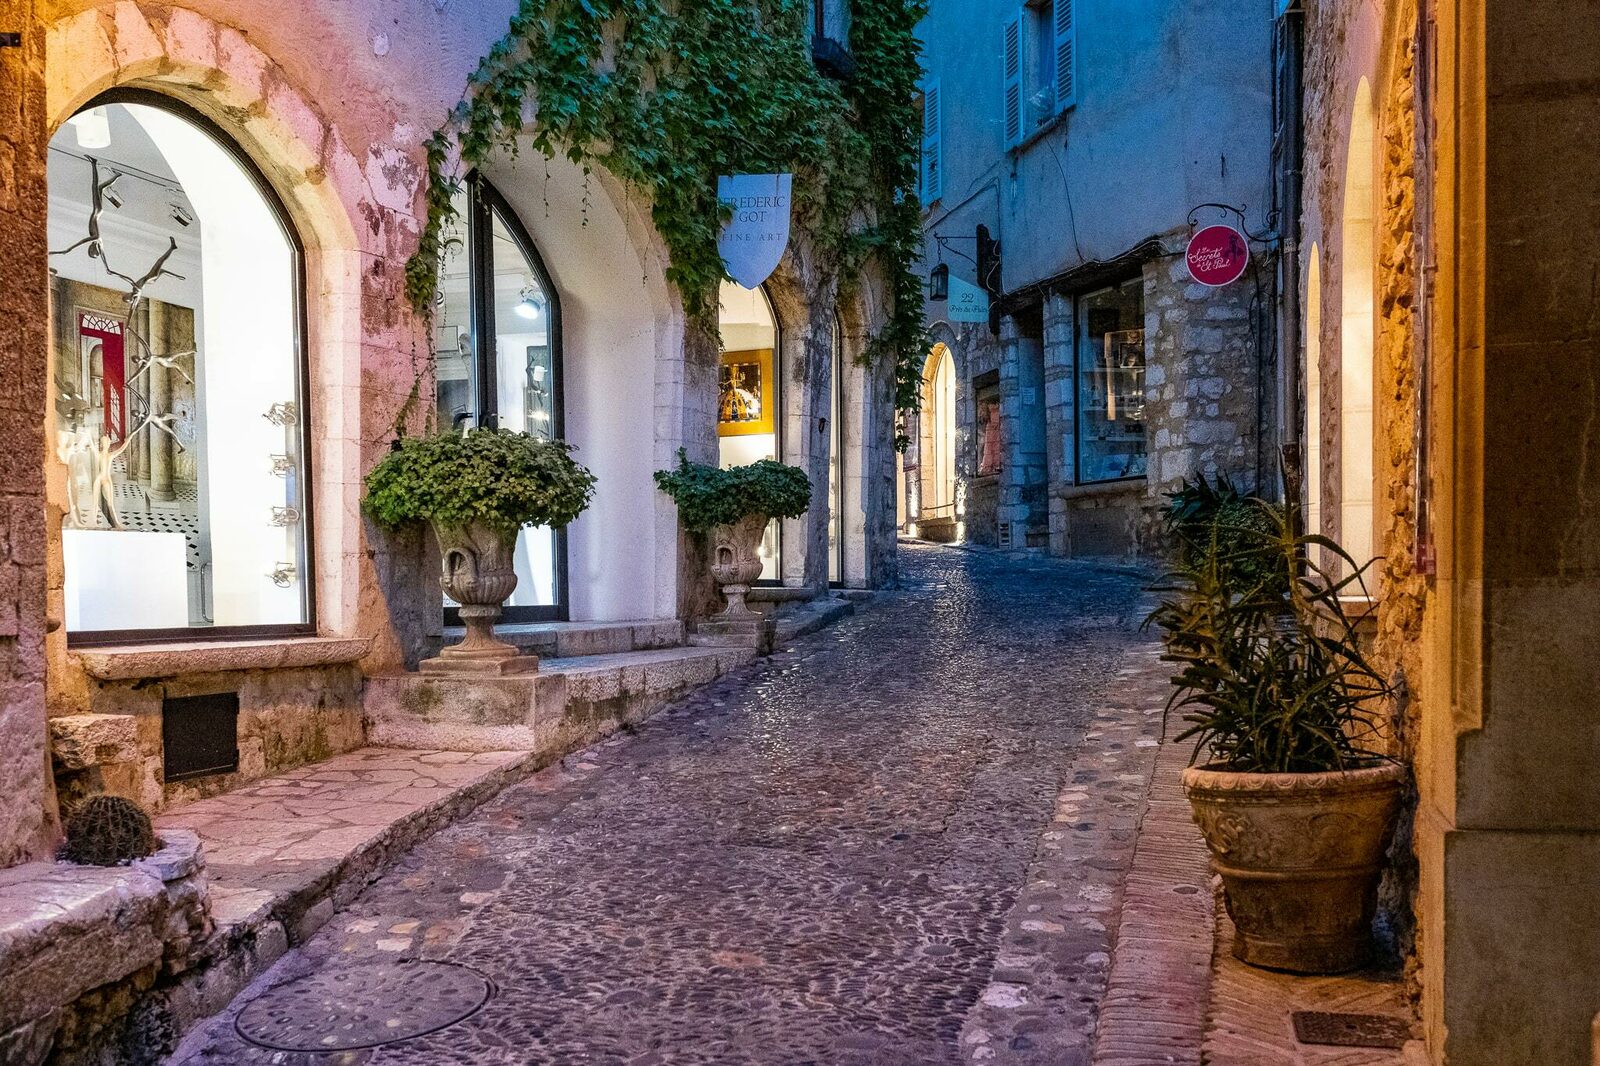 Historical and artistic features of Vence